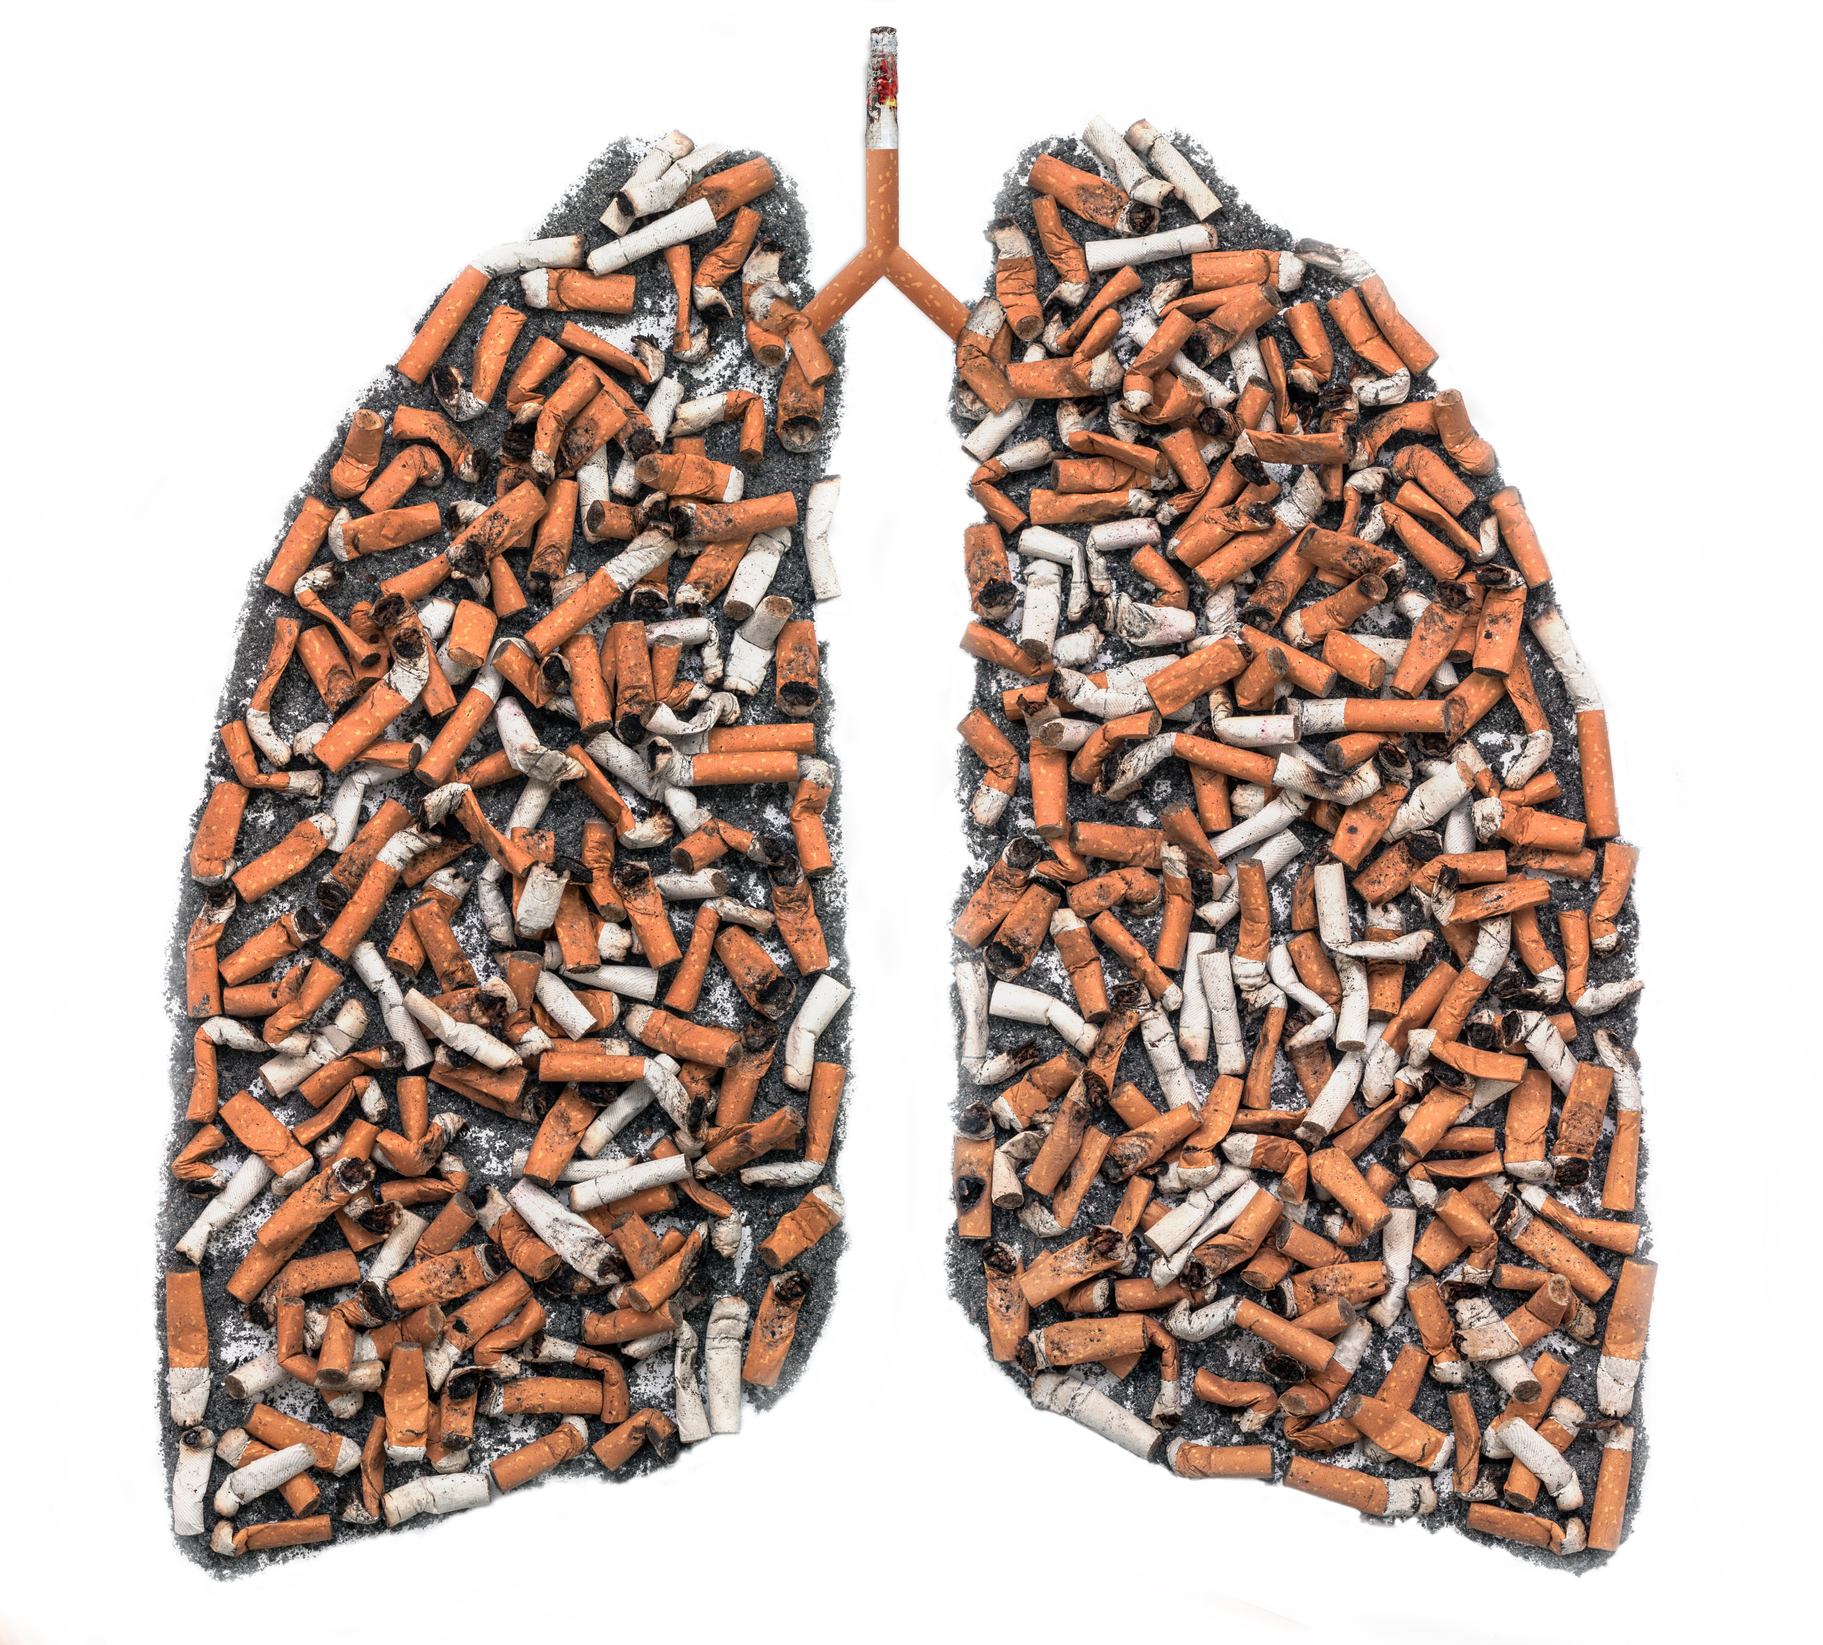 Smoker's lungs - cigarette butts illustrate the pollution of the lungs when smoking.